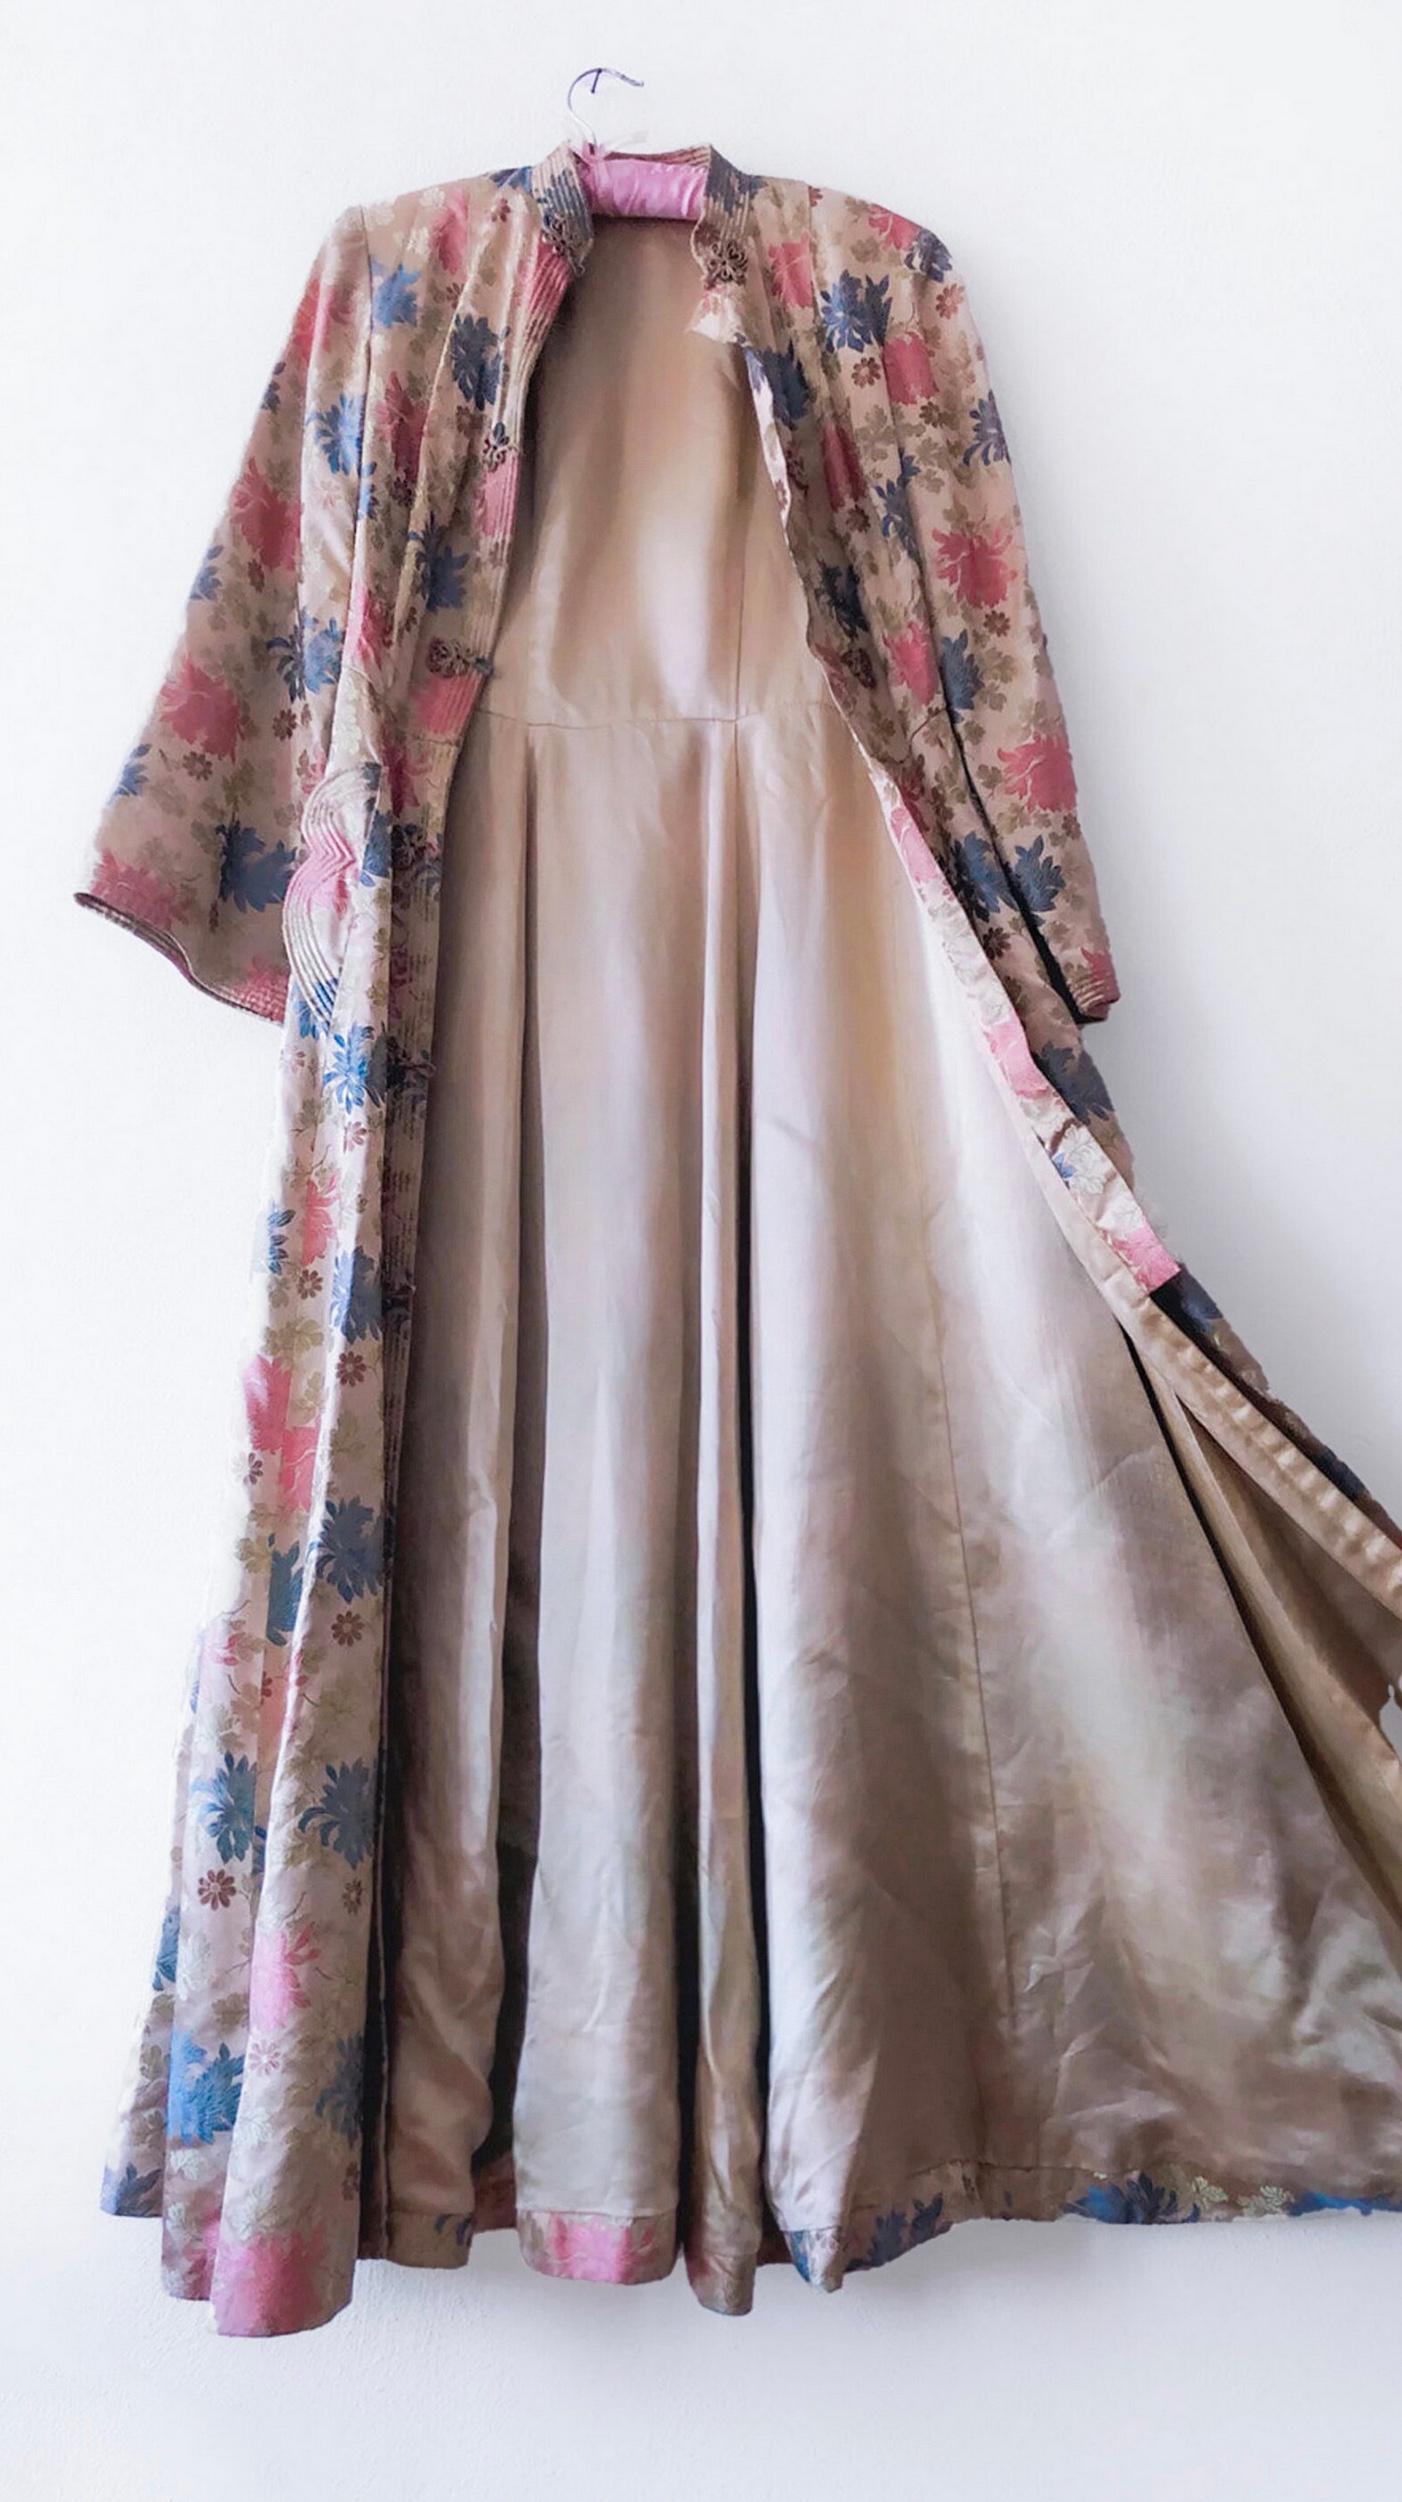 Beautiful Vintage Silk Kimono Dress Gown 1950s Couture Asian Robe Coat 40s 50s For Sale 2